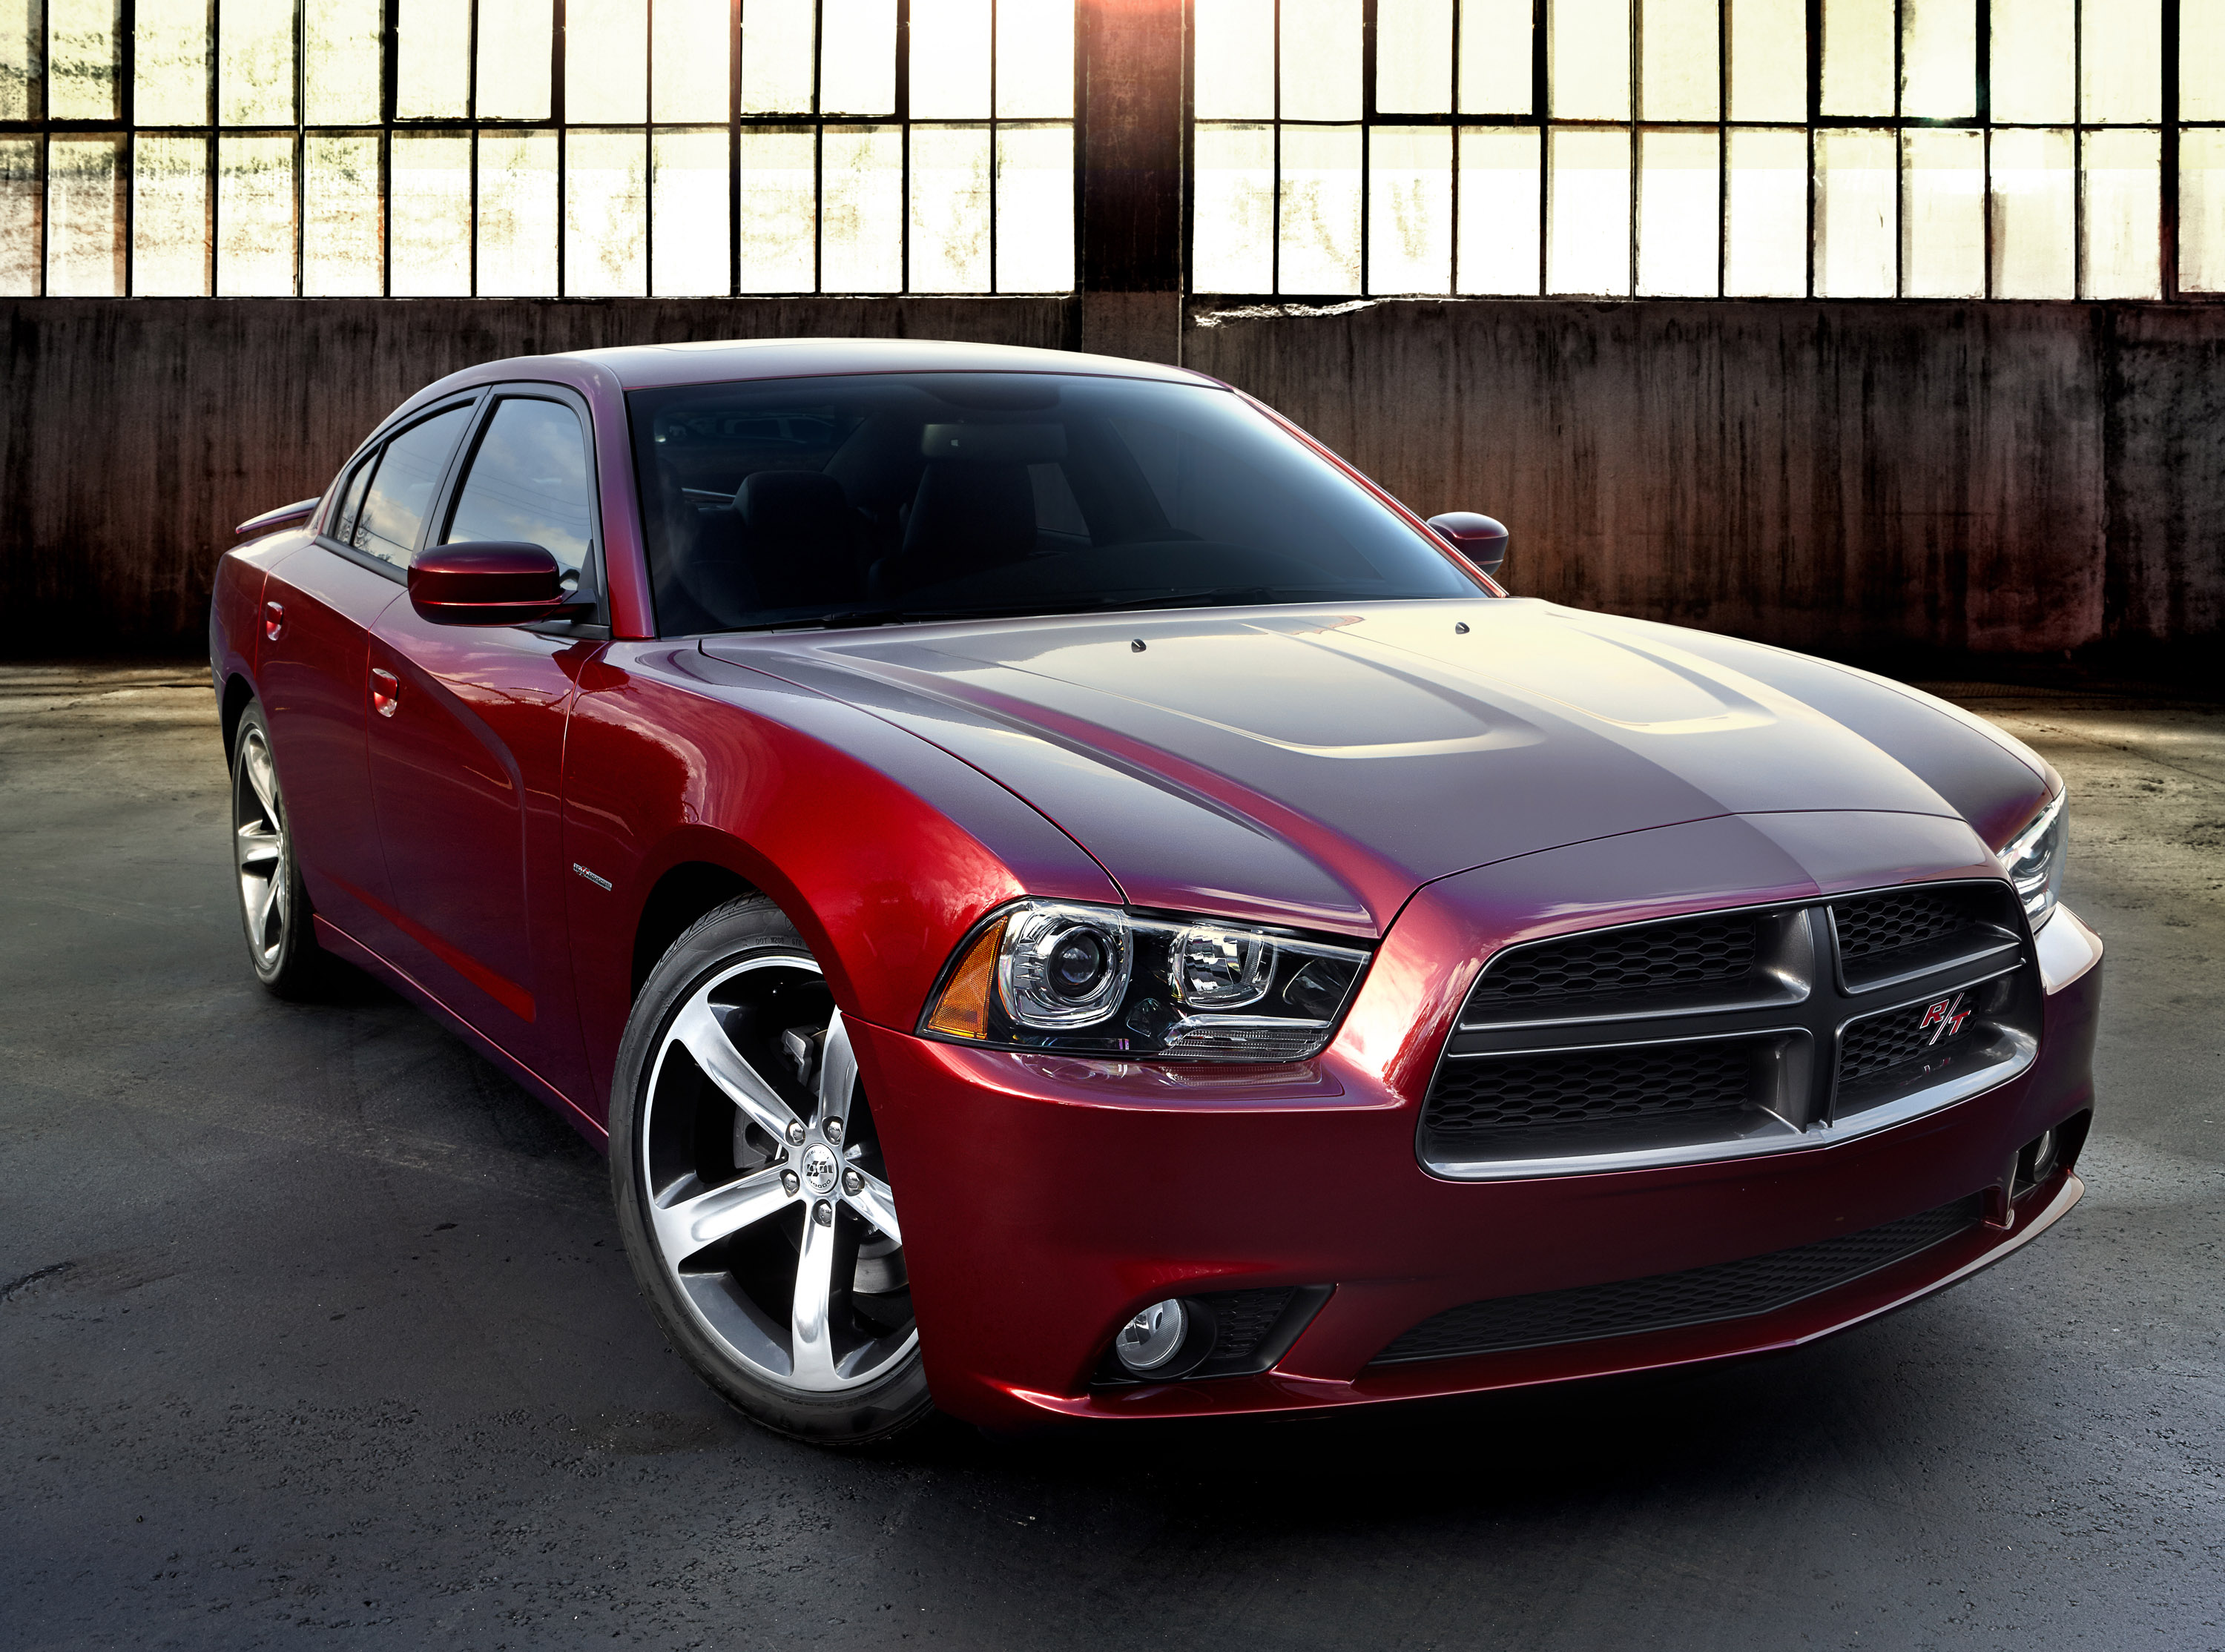 Dodge Charger 100th Anniversary Edition photo #1